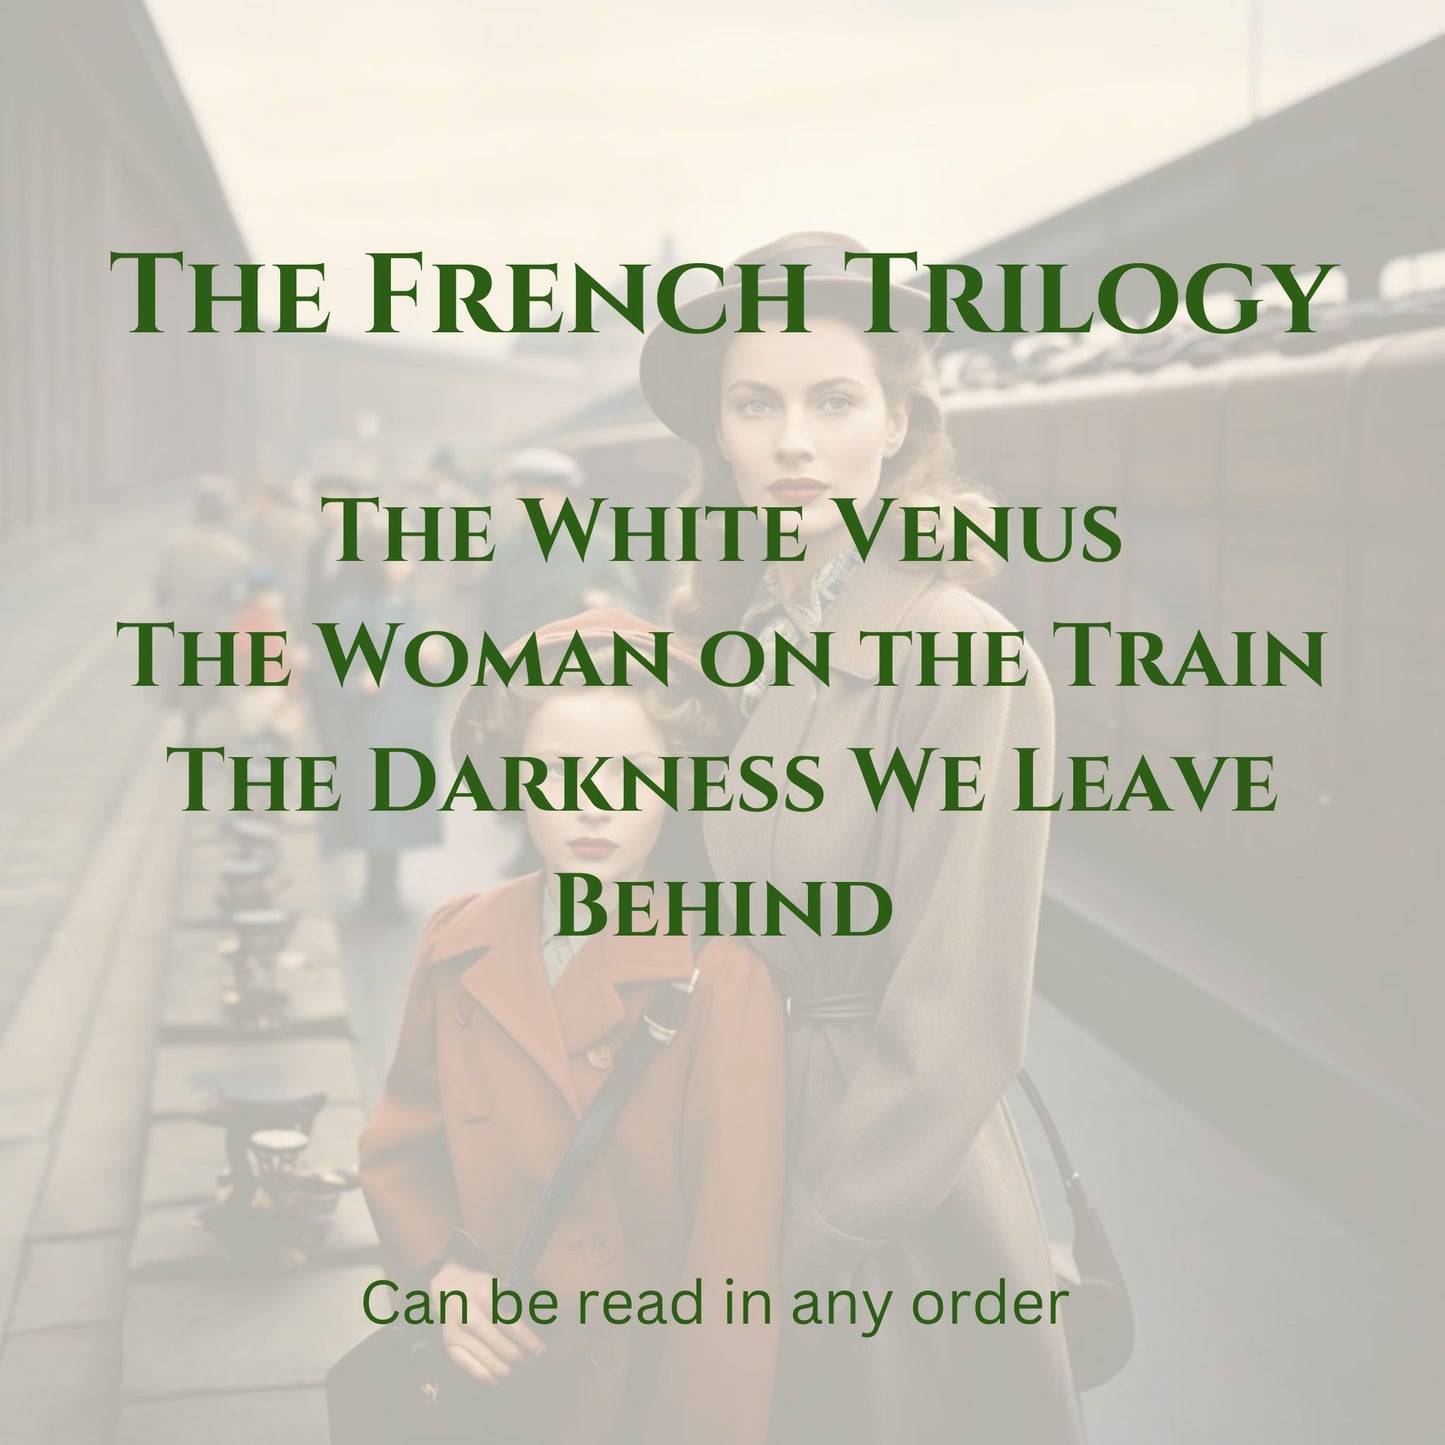 The French Trilogy | ebooks